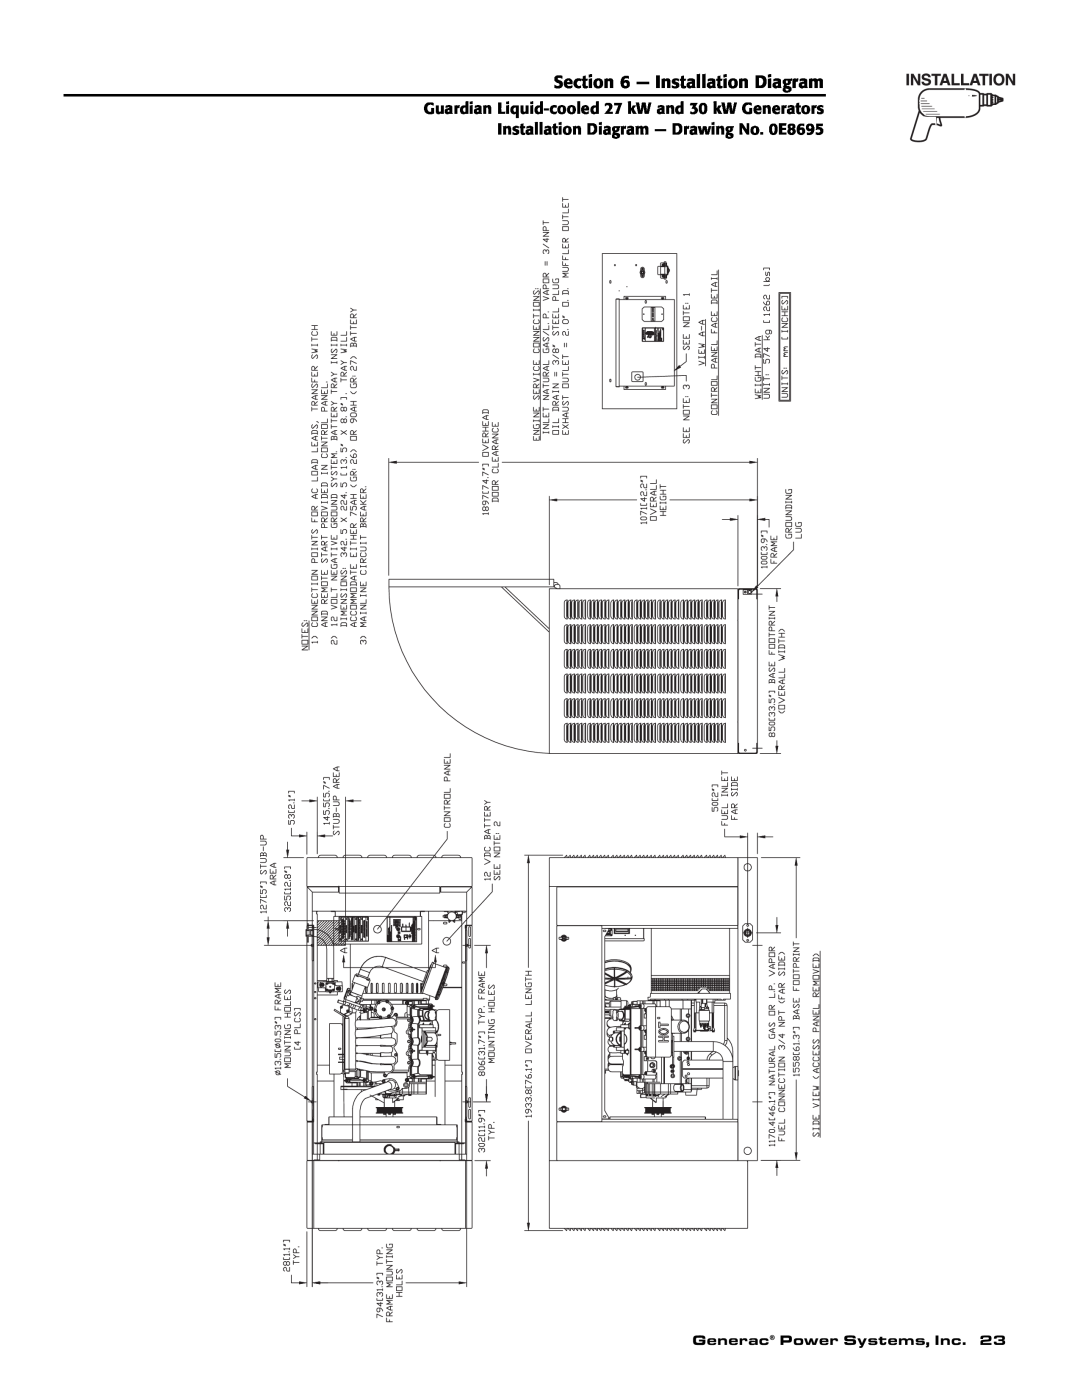 Generac Power Systems 004988-1 owner manual Installation Diagram, Guardian Liquid-cooled27 kW and 30 kW Generators 